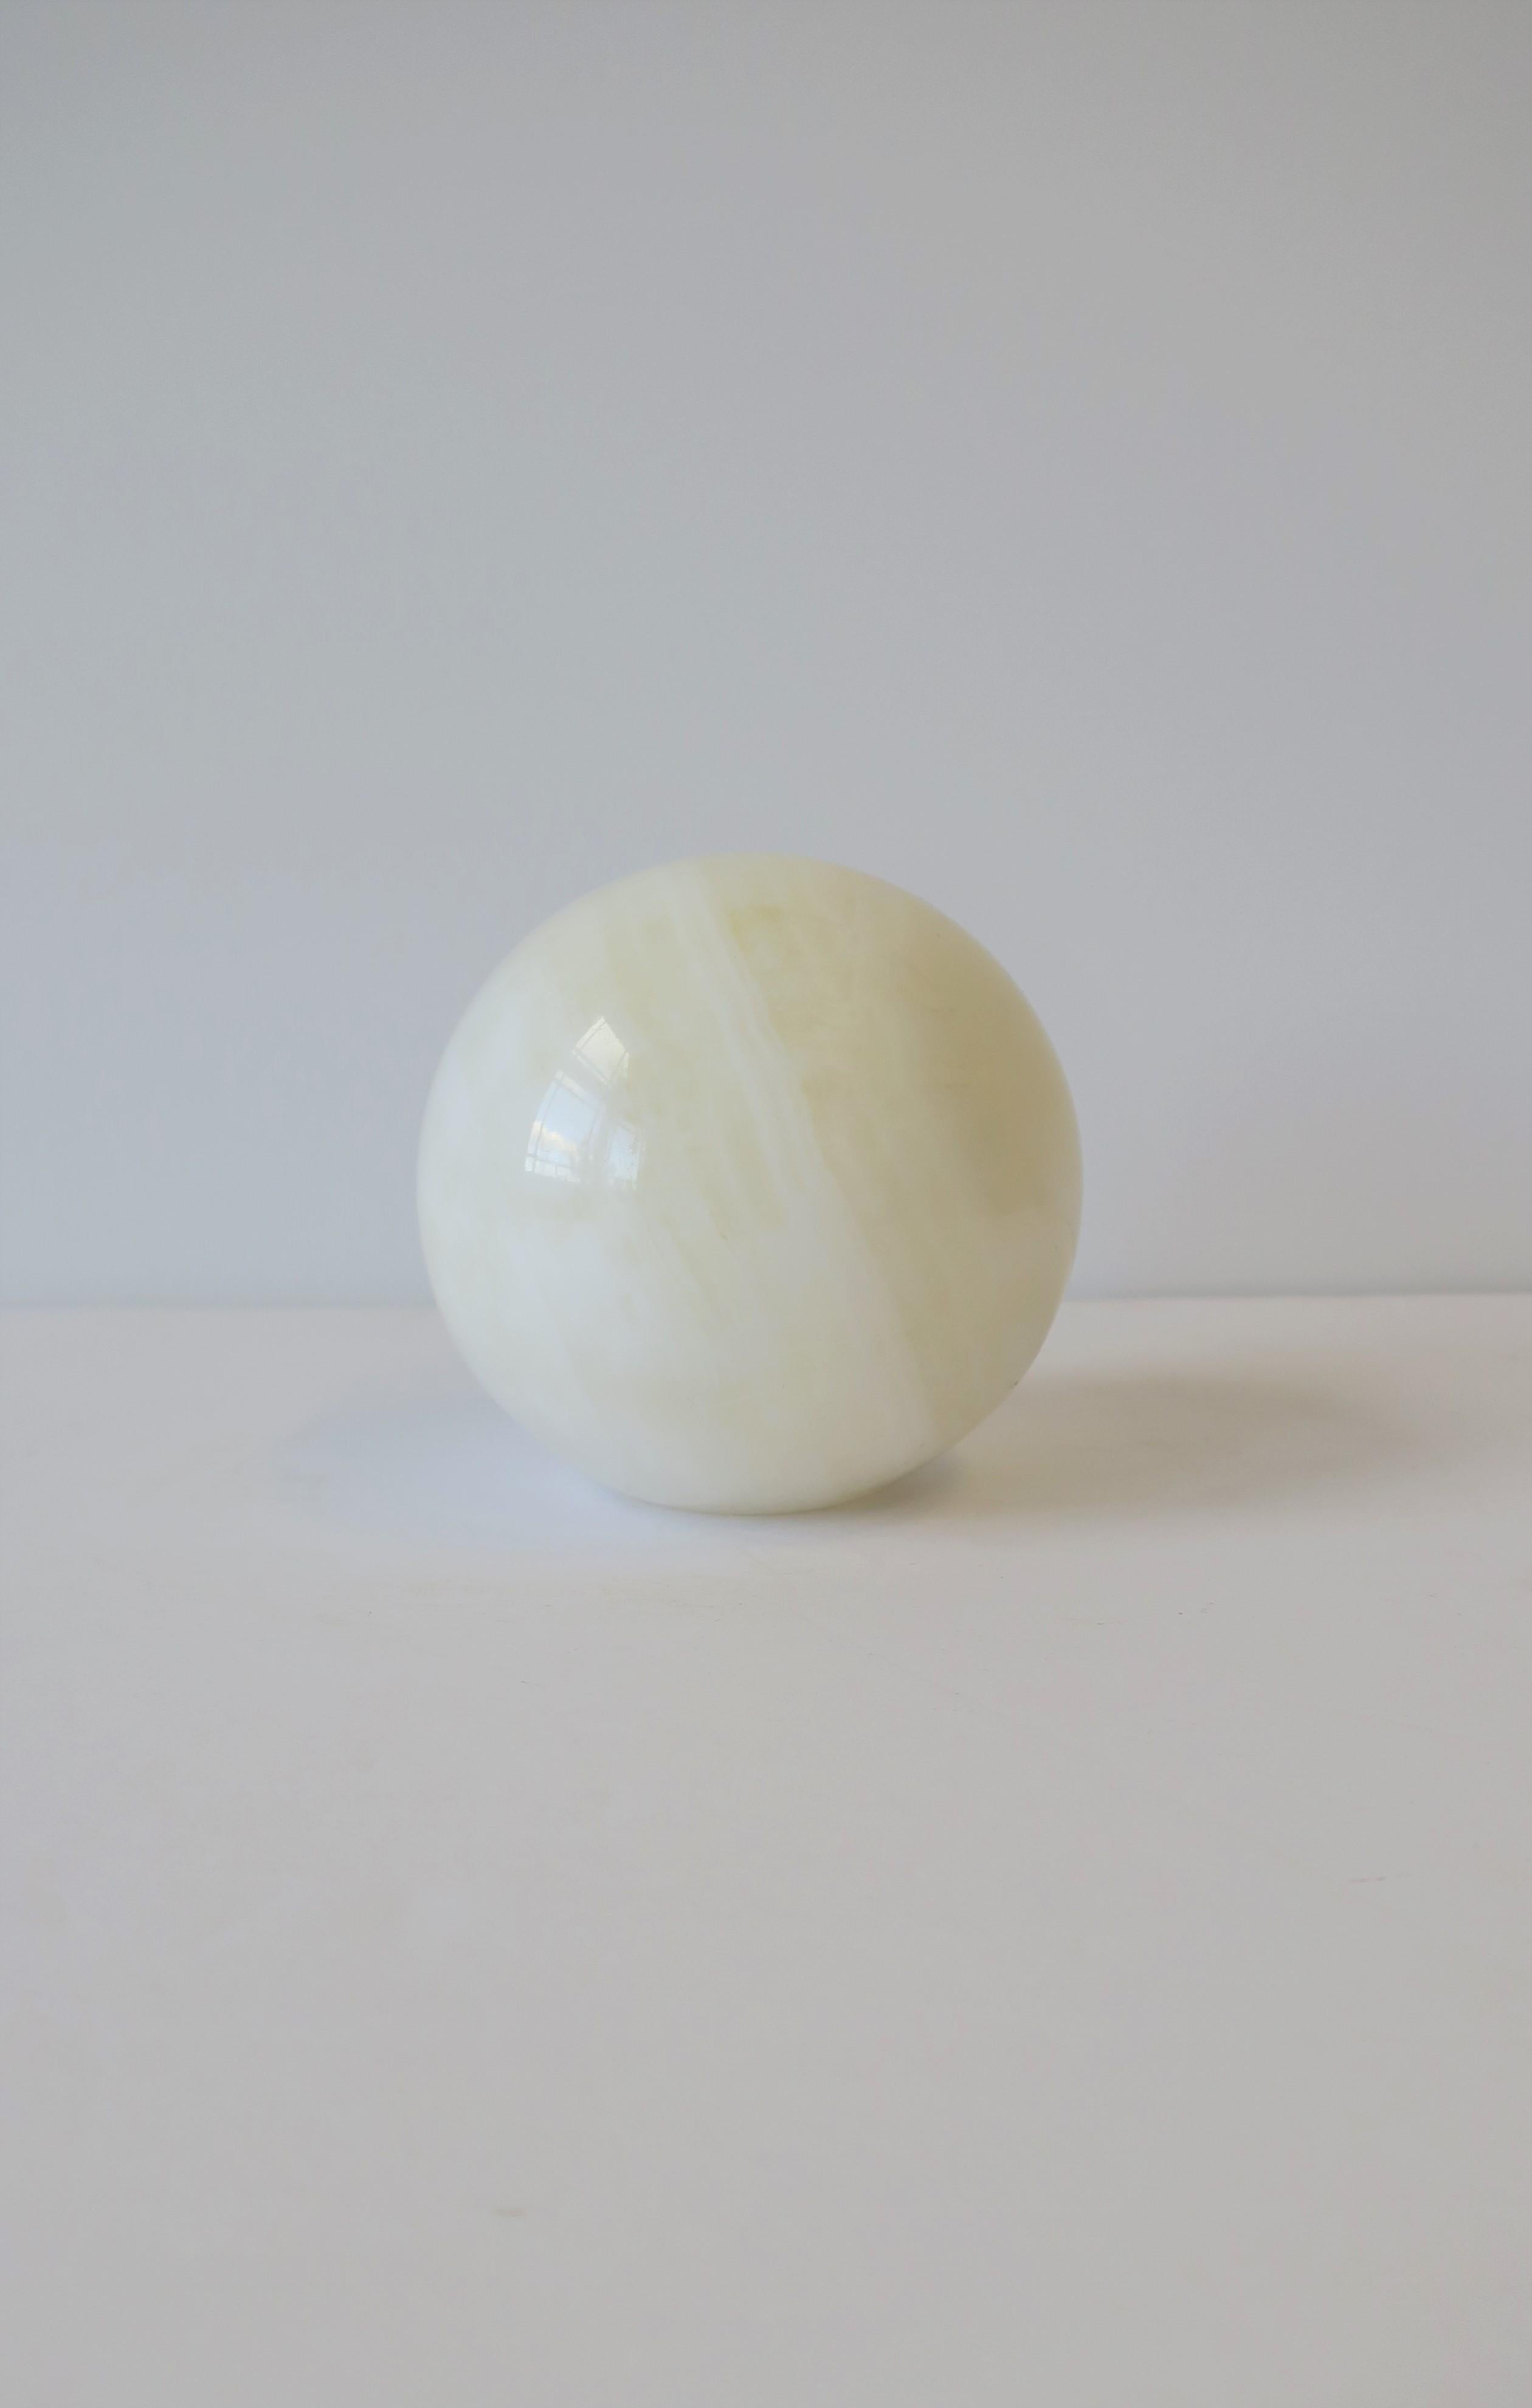 A substantial white onyx marble round ball sphere decorative. Piece has flat bottom for stability. A great decorative object for a living room, office, etc. Dimensions: 3.5